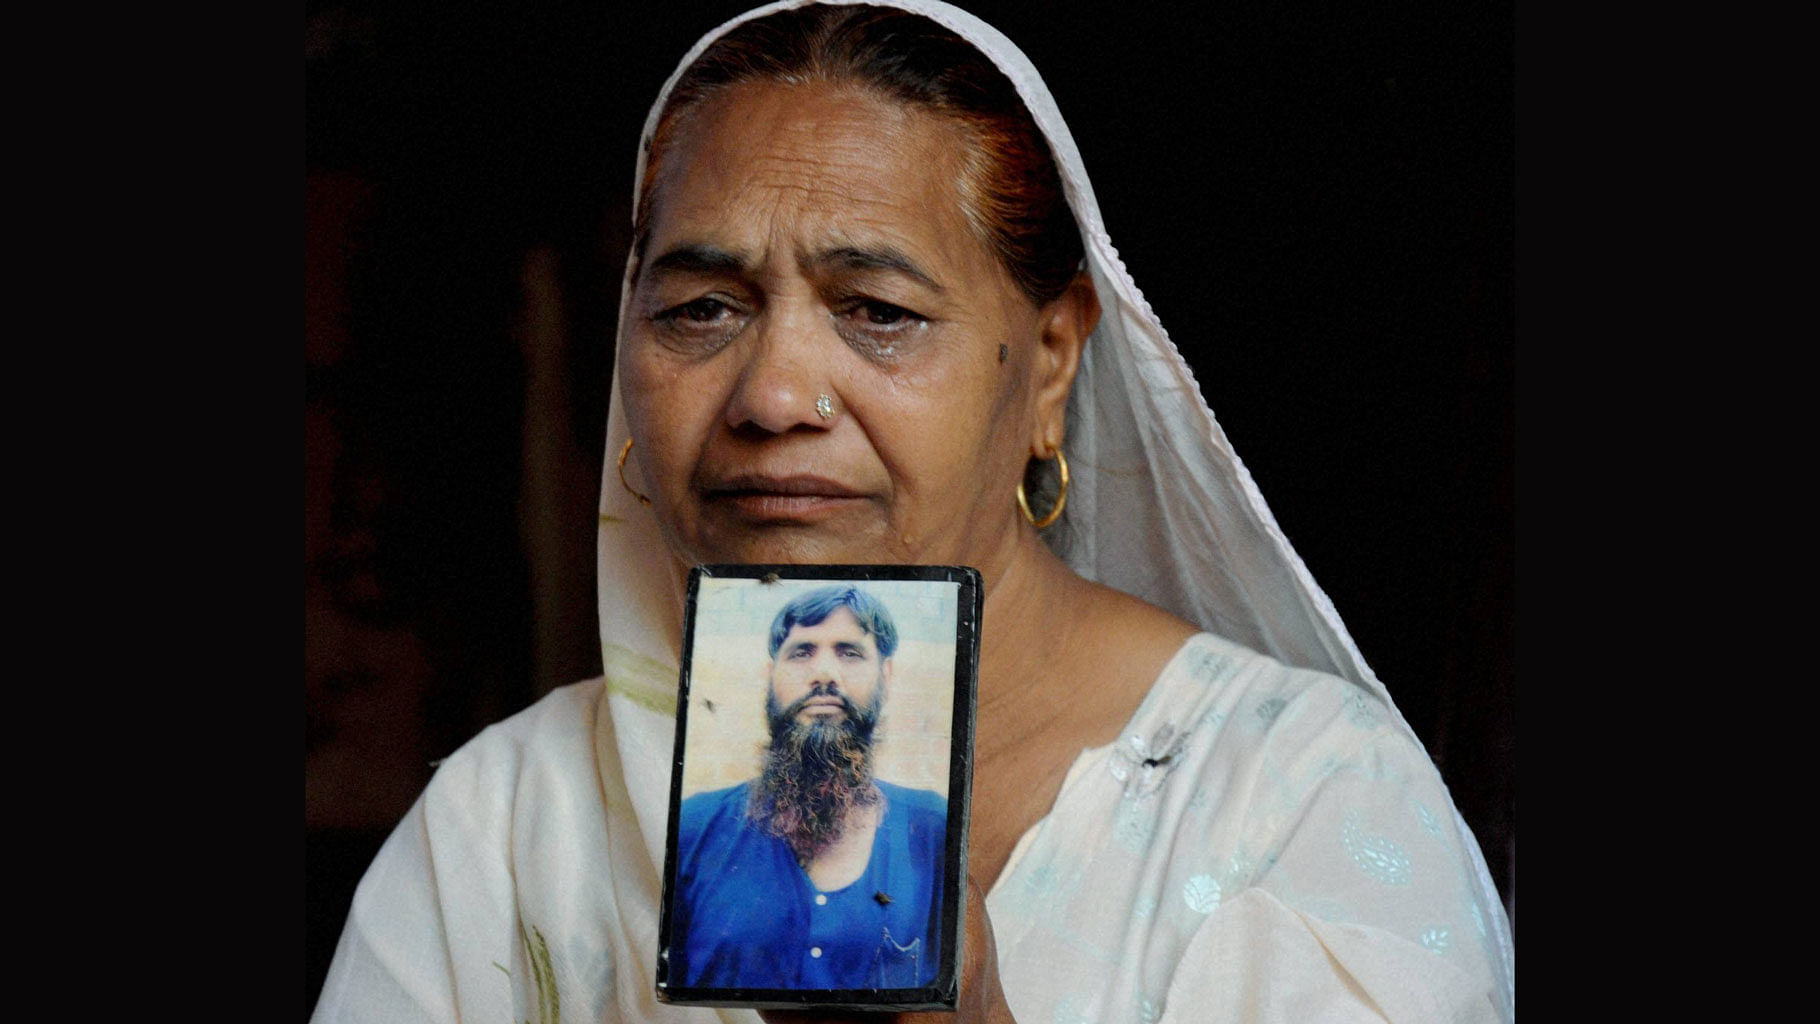 Jagir Kaur,  Kirpal Singh’s sister, cries as she shows his photograph while mourning the news of his death in Amritsar on Tuesday. (Photo: PTI)